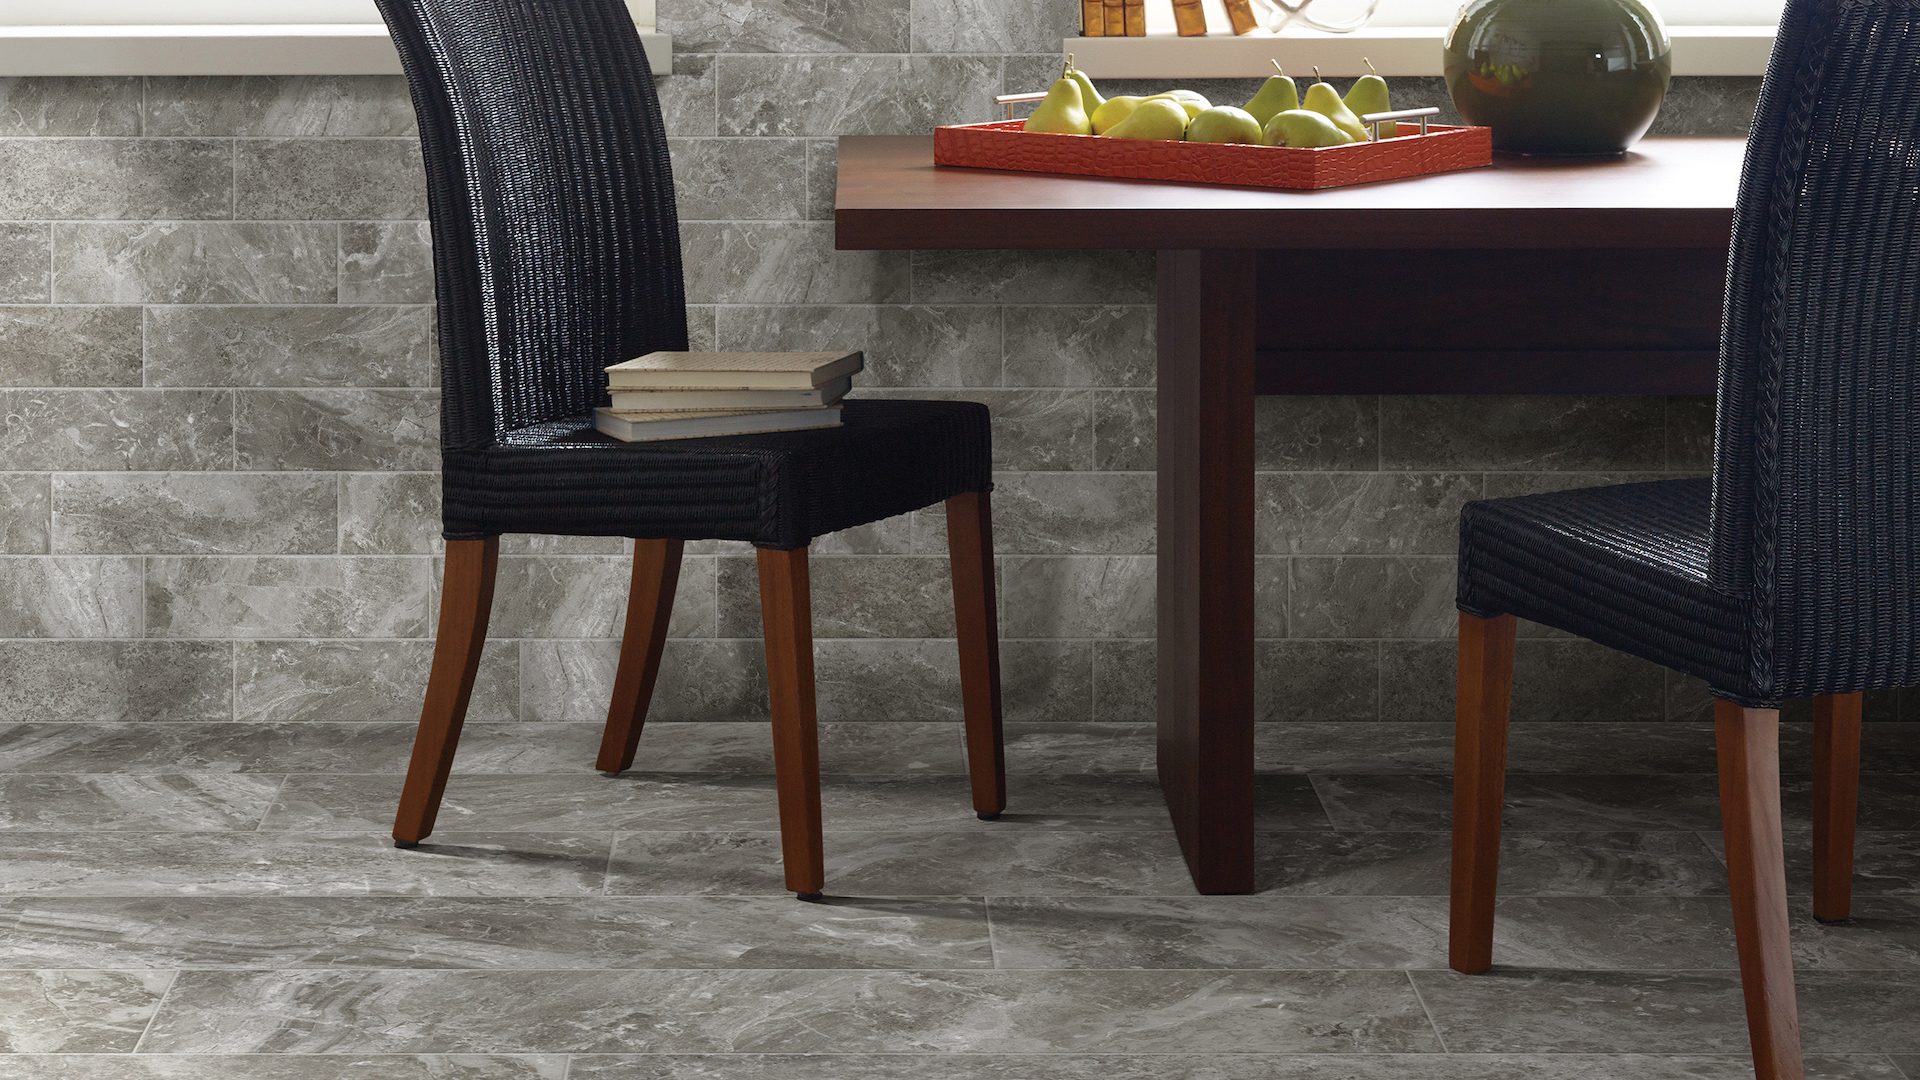 Commercial tile flooring with a table and chairs by large windows